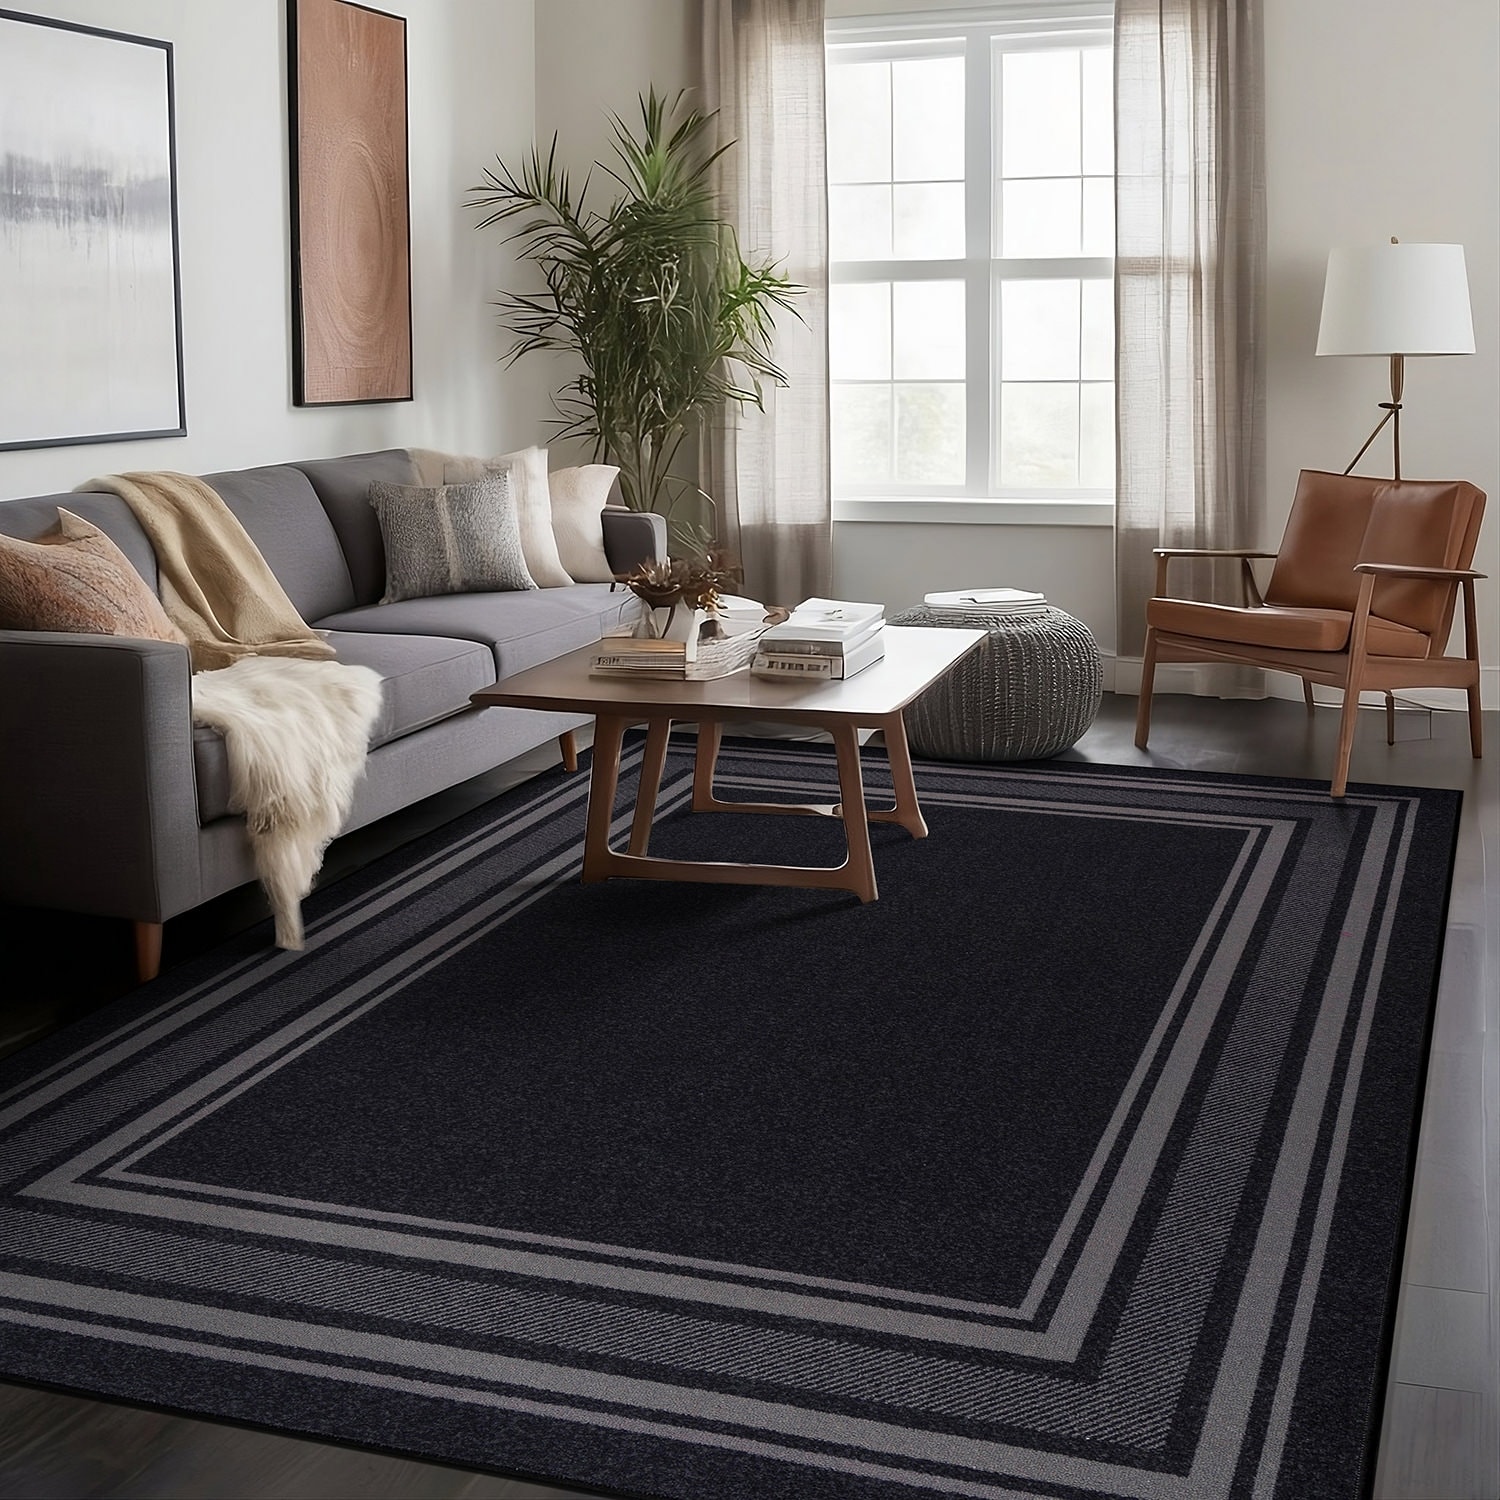 https://ak1.ostkcdn.com/images/products/is/images/direct/4edf85a303c29dcef0f81b6249dd27d31dc7c30e/Beverly-Rug-Non-Slip-Indoor-Rugs-for-Living-Room-Bordered-Area-Rug-Blue-8X10.jpg